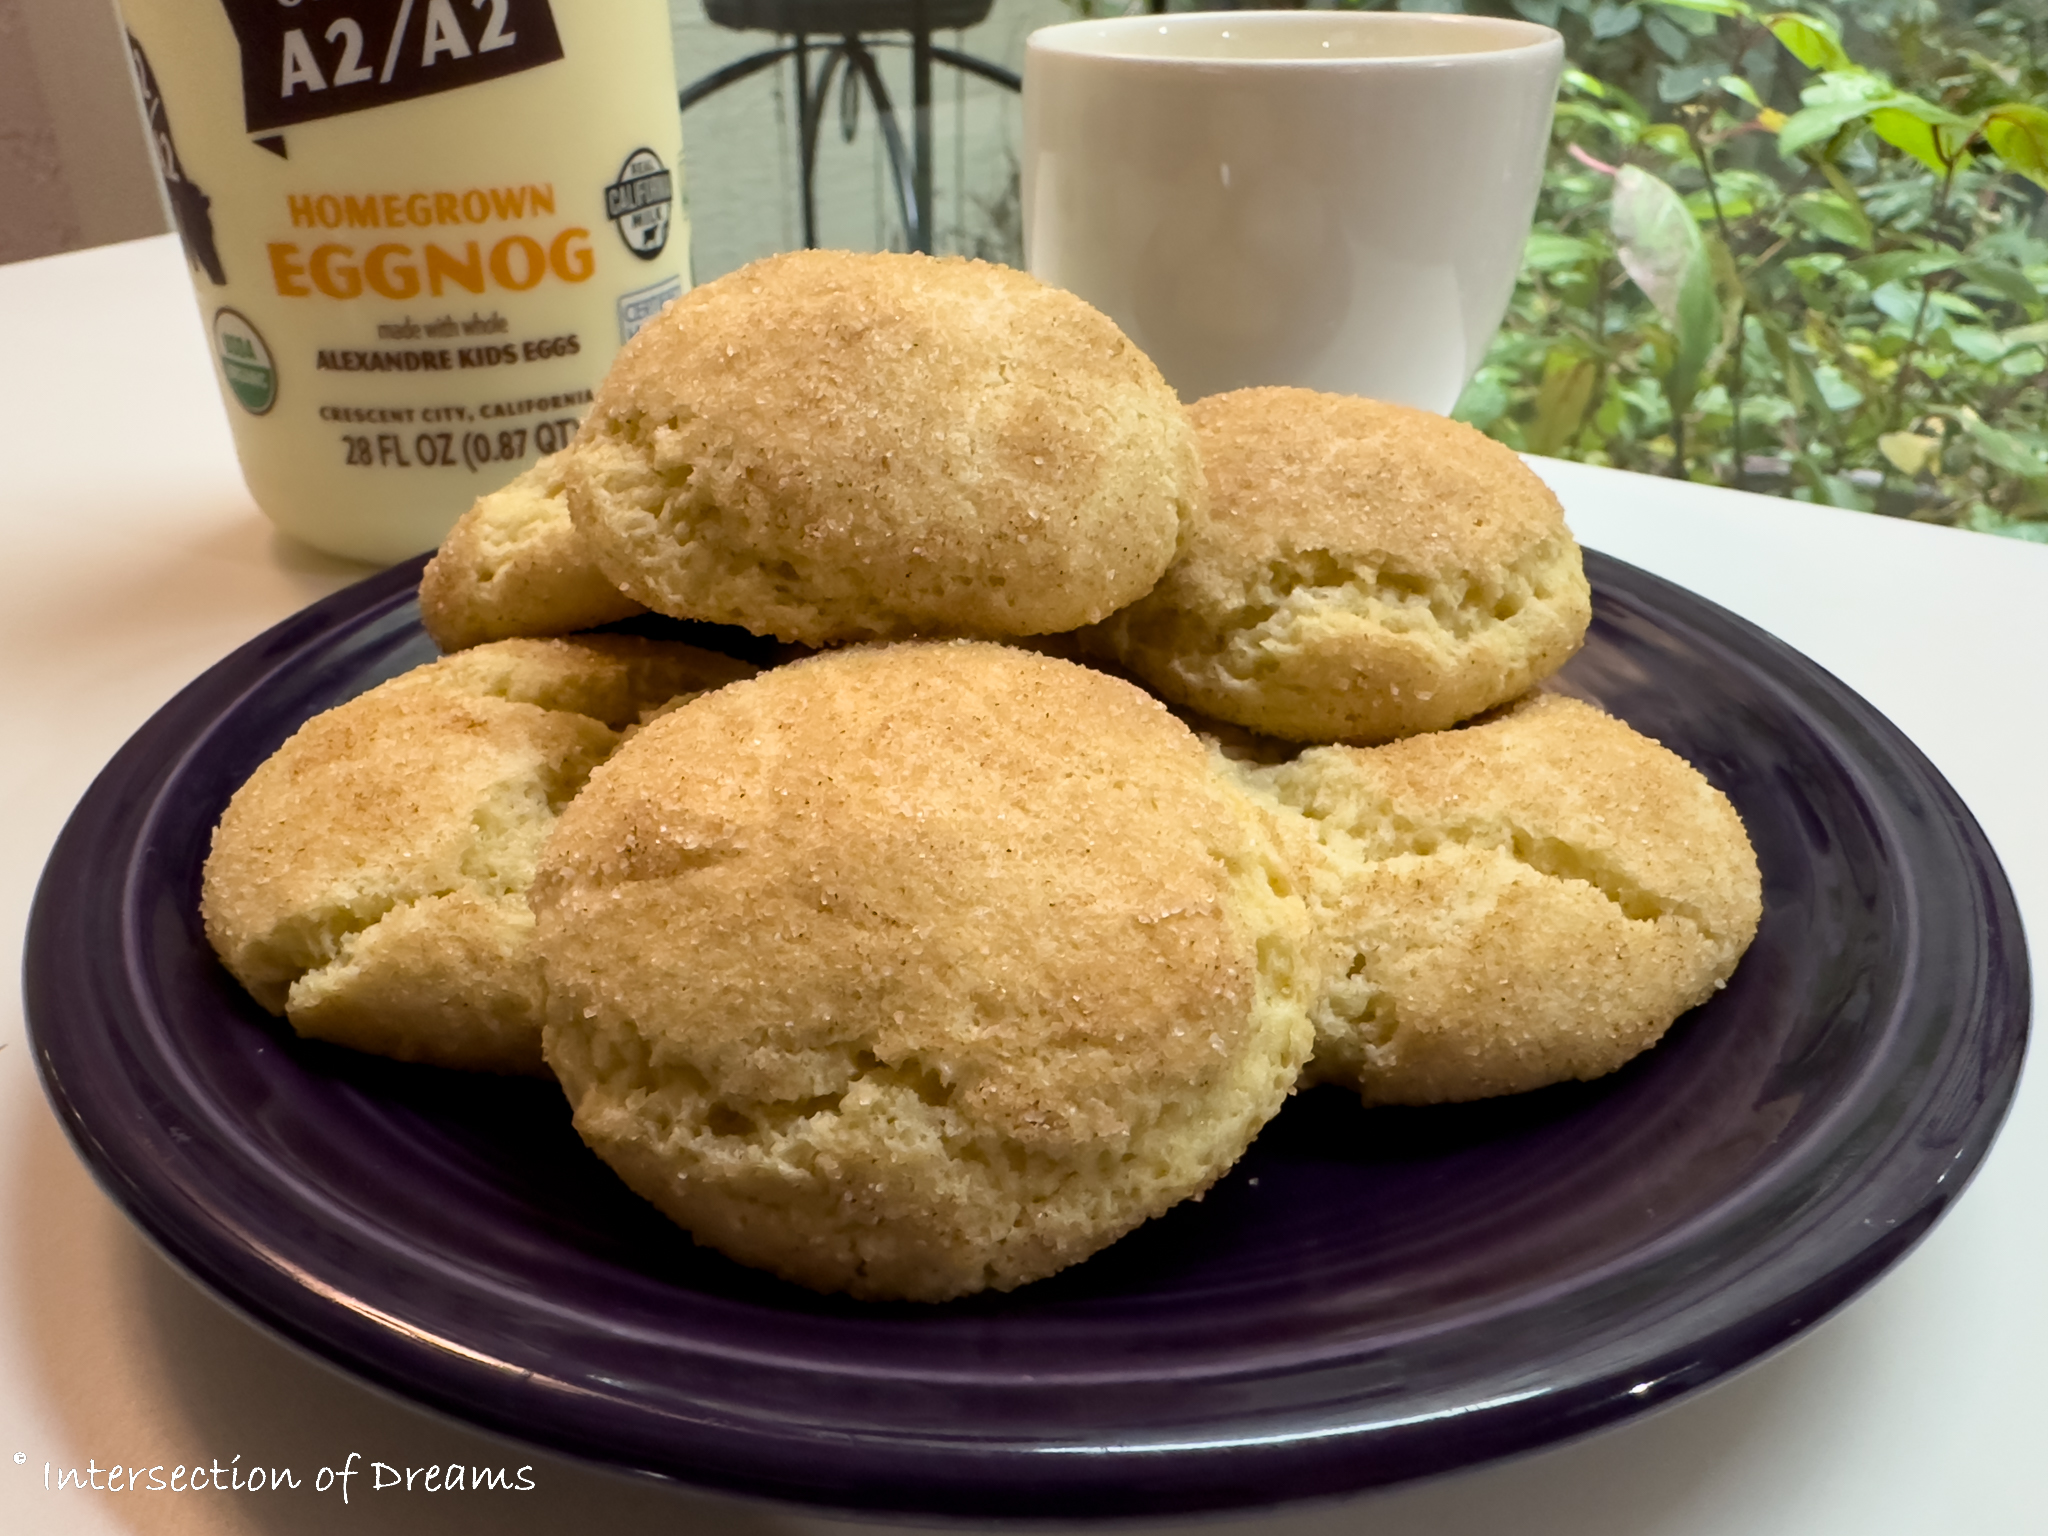 Eggnog Snickerdoodles stacked on a purple plate